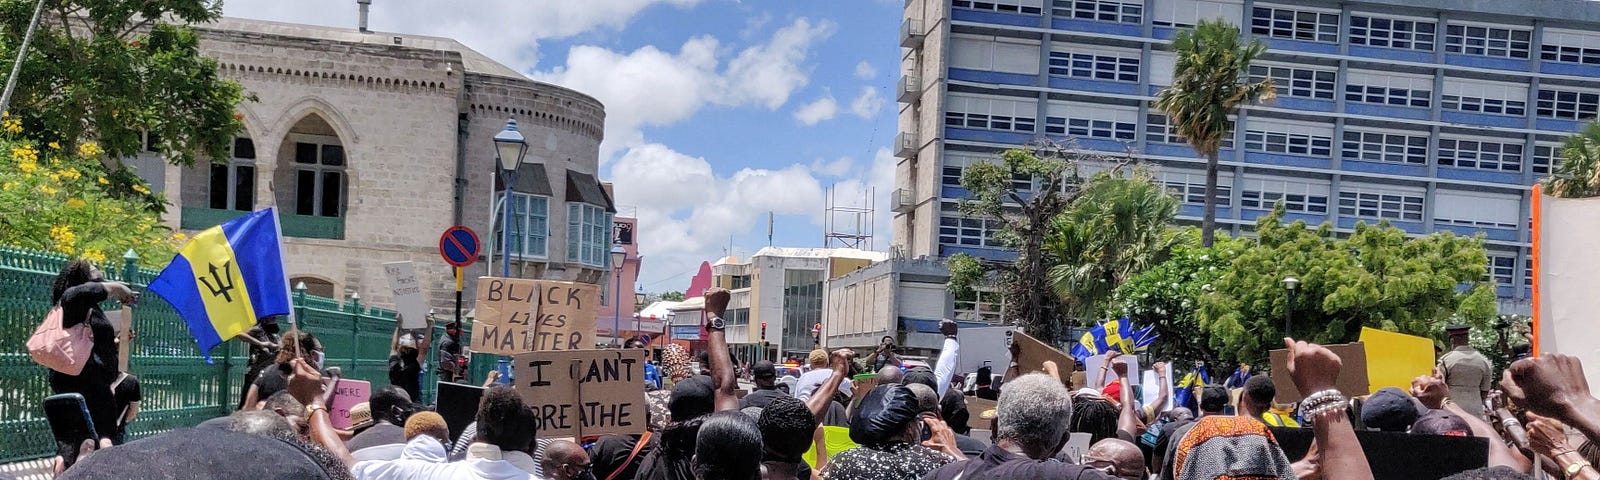 Black Lives Matter protest in Bridgetown, Barbados (photo by Sharon Hurley Hall) — shows people kneeling near to the Parliament building